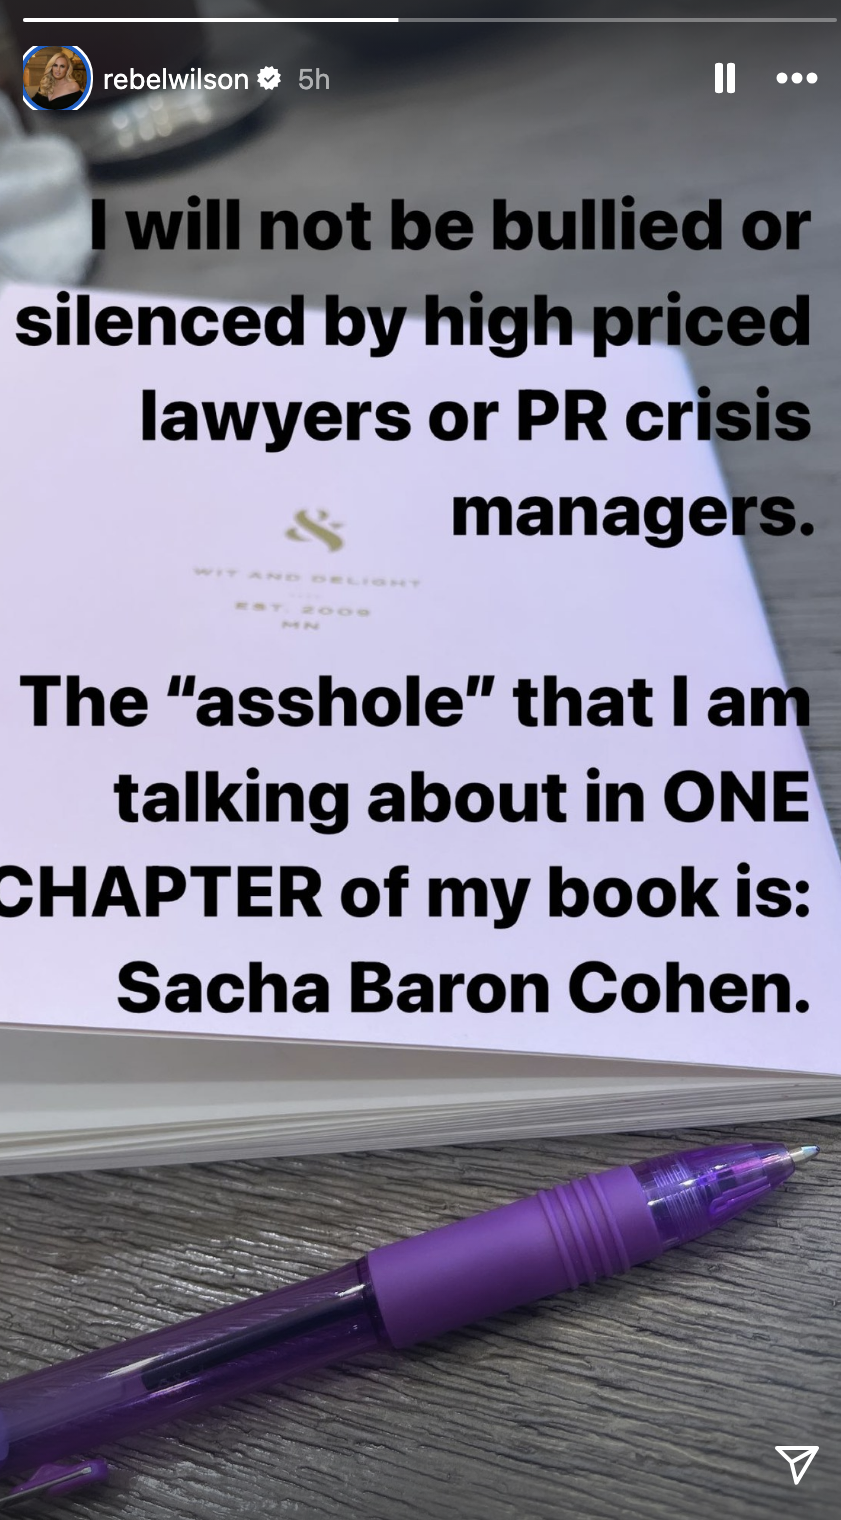 Screenshot of her IG story with a statement mentioning resistance to bullying by lawyers, naming Sacha Baron Cohen in a book chapter controversy